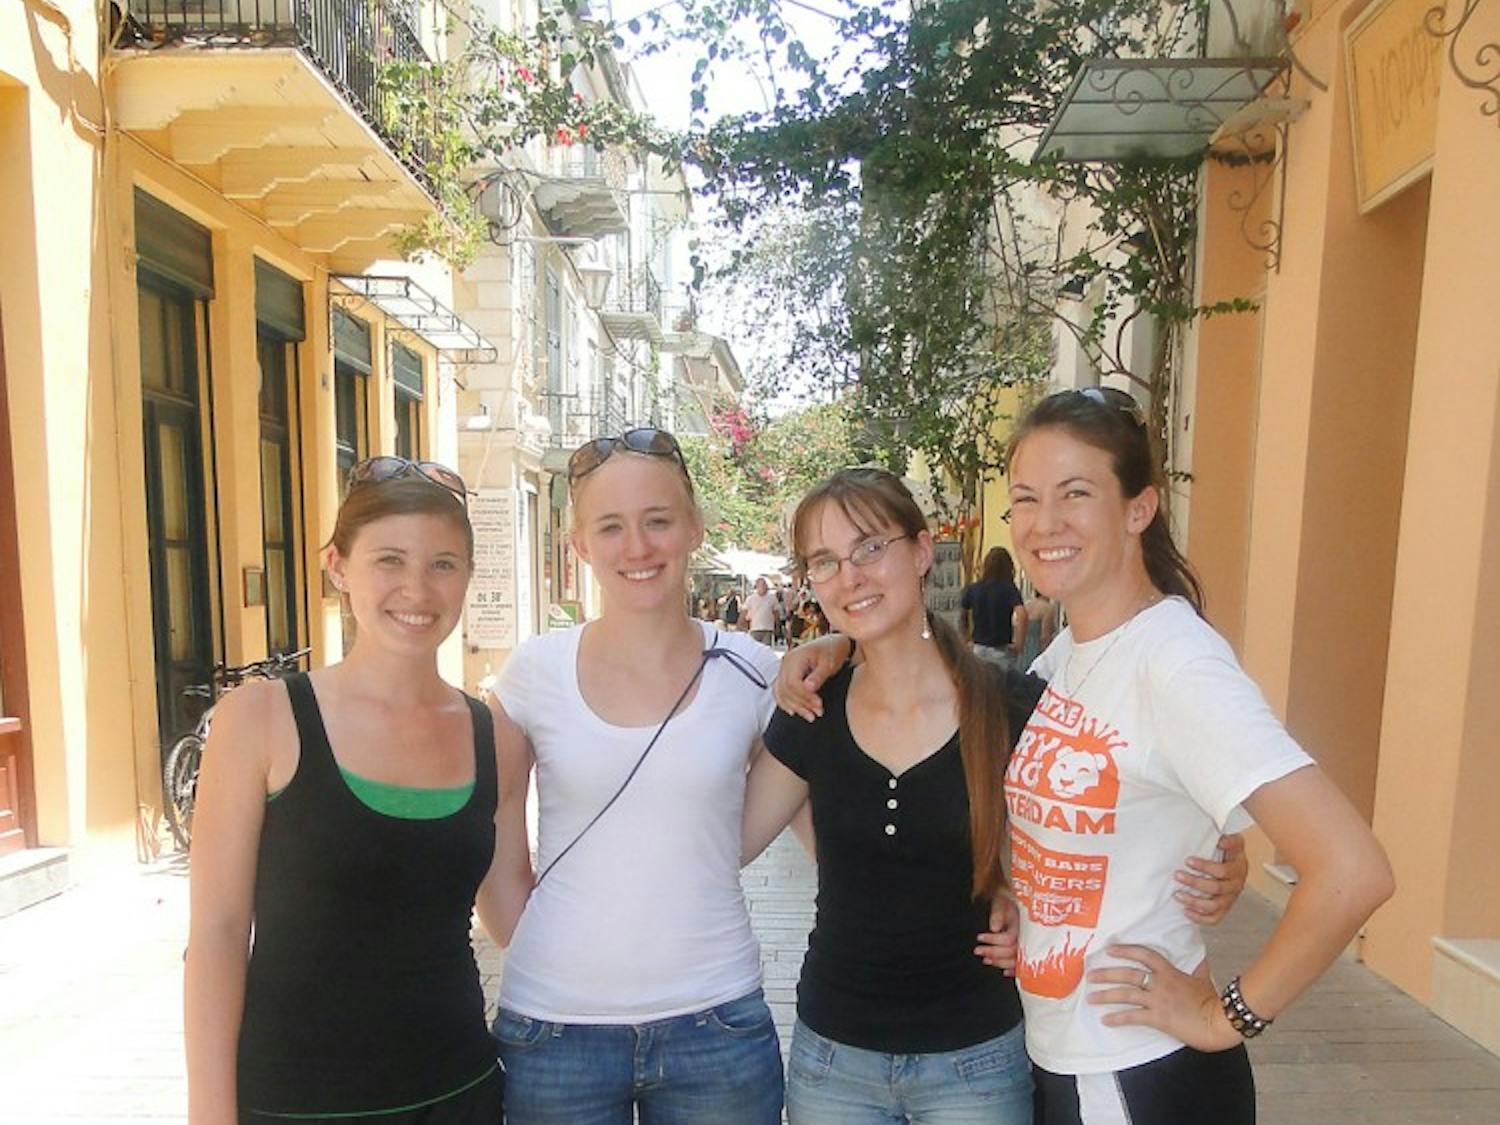 Eastern students Jenny Cannell, Megan Byrne, Danielle Sebranek and Kelli Bass stop for a history lesson and lunch in Nafplion, Greece.